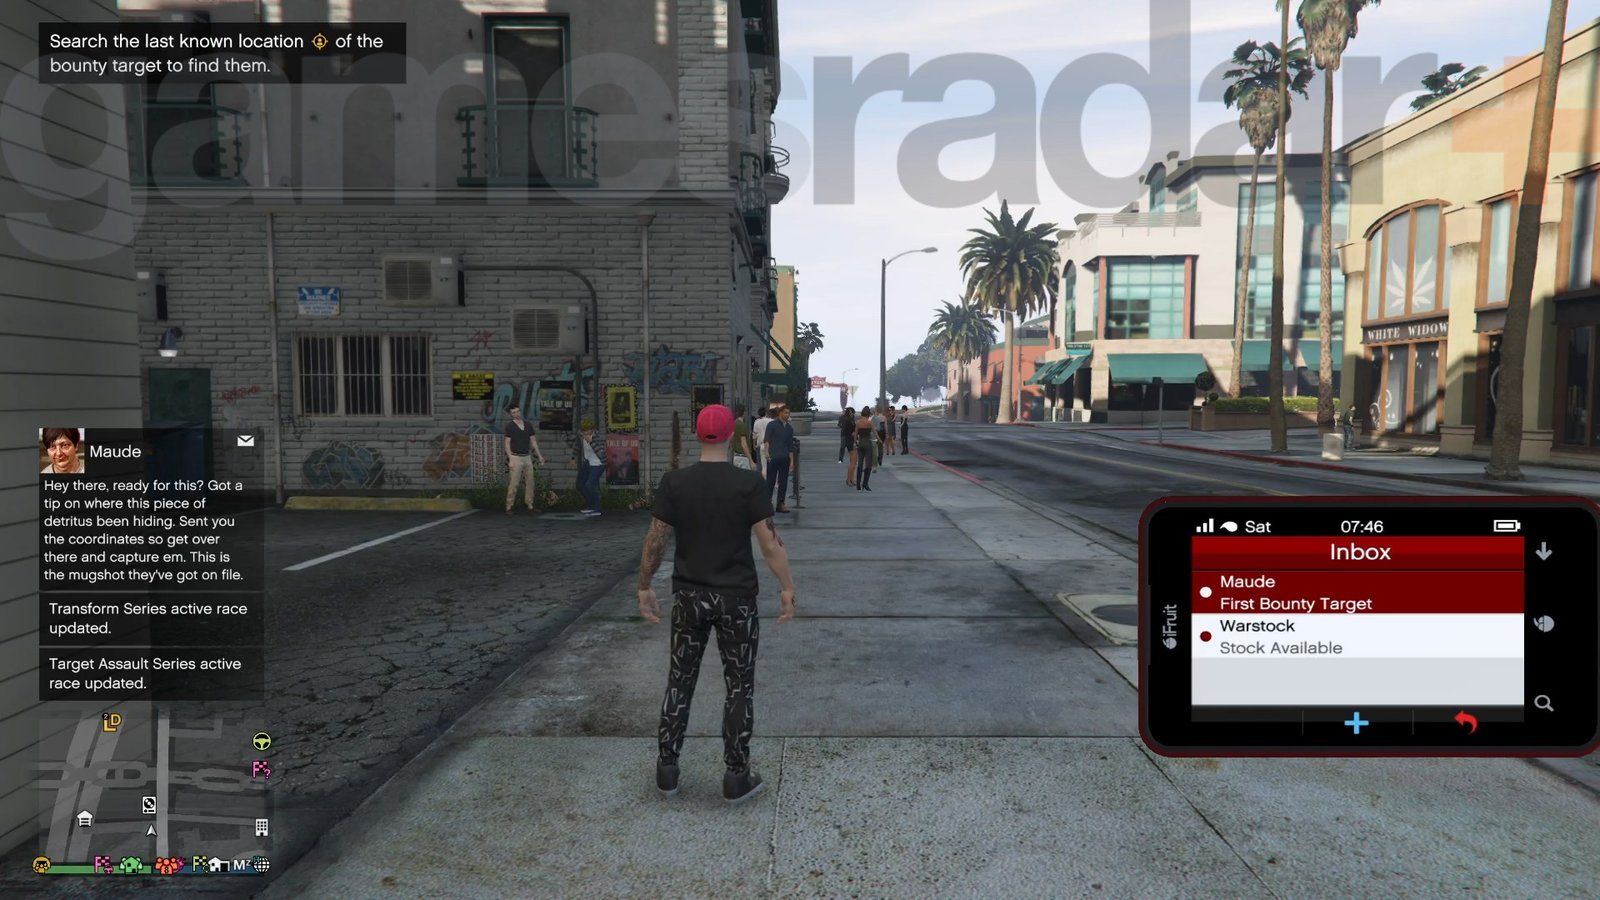 GTA Online Bounty Hunting target received by text from Maude